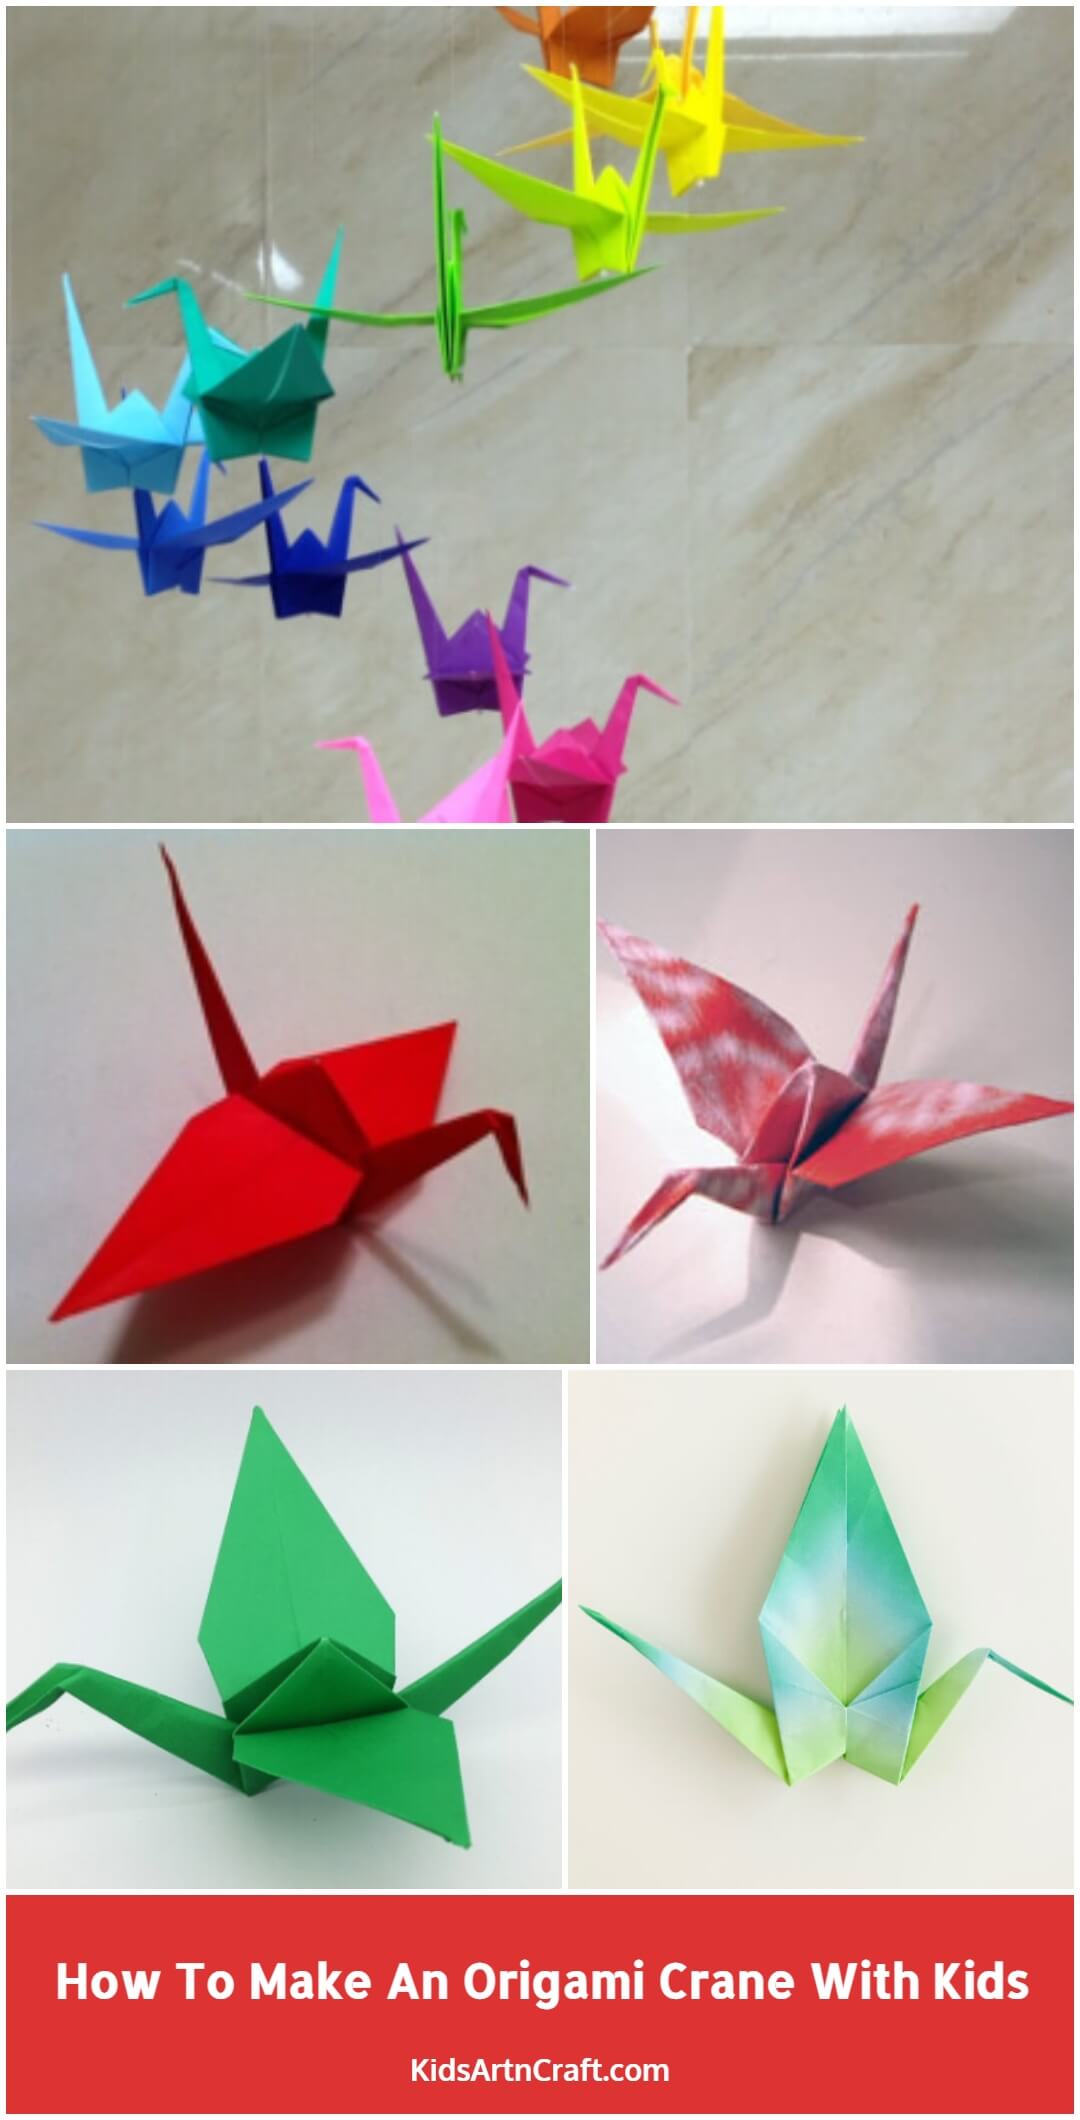 How To Make An Origami Crane With Kids